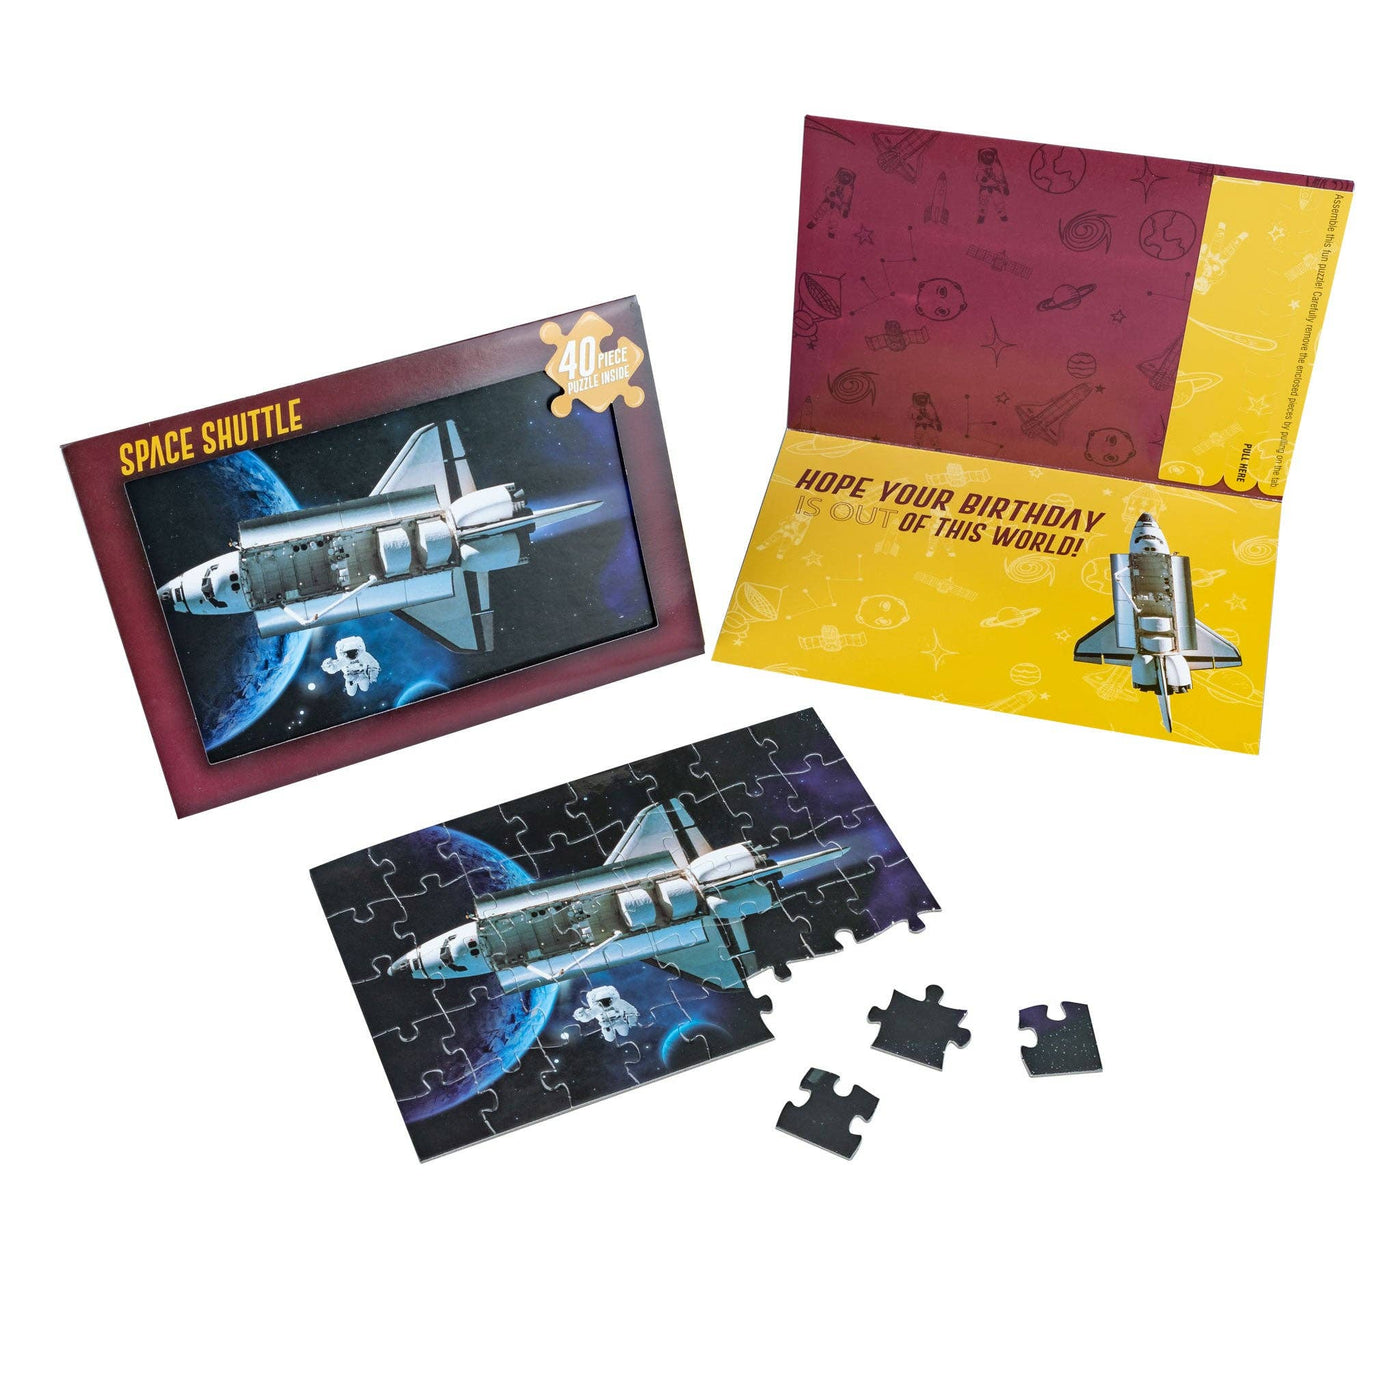 Space Shuttle - Puzzle Greeting Card